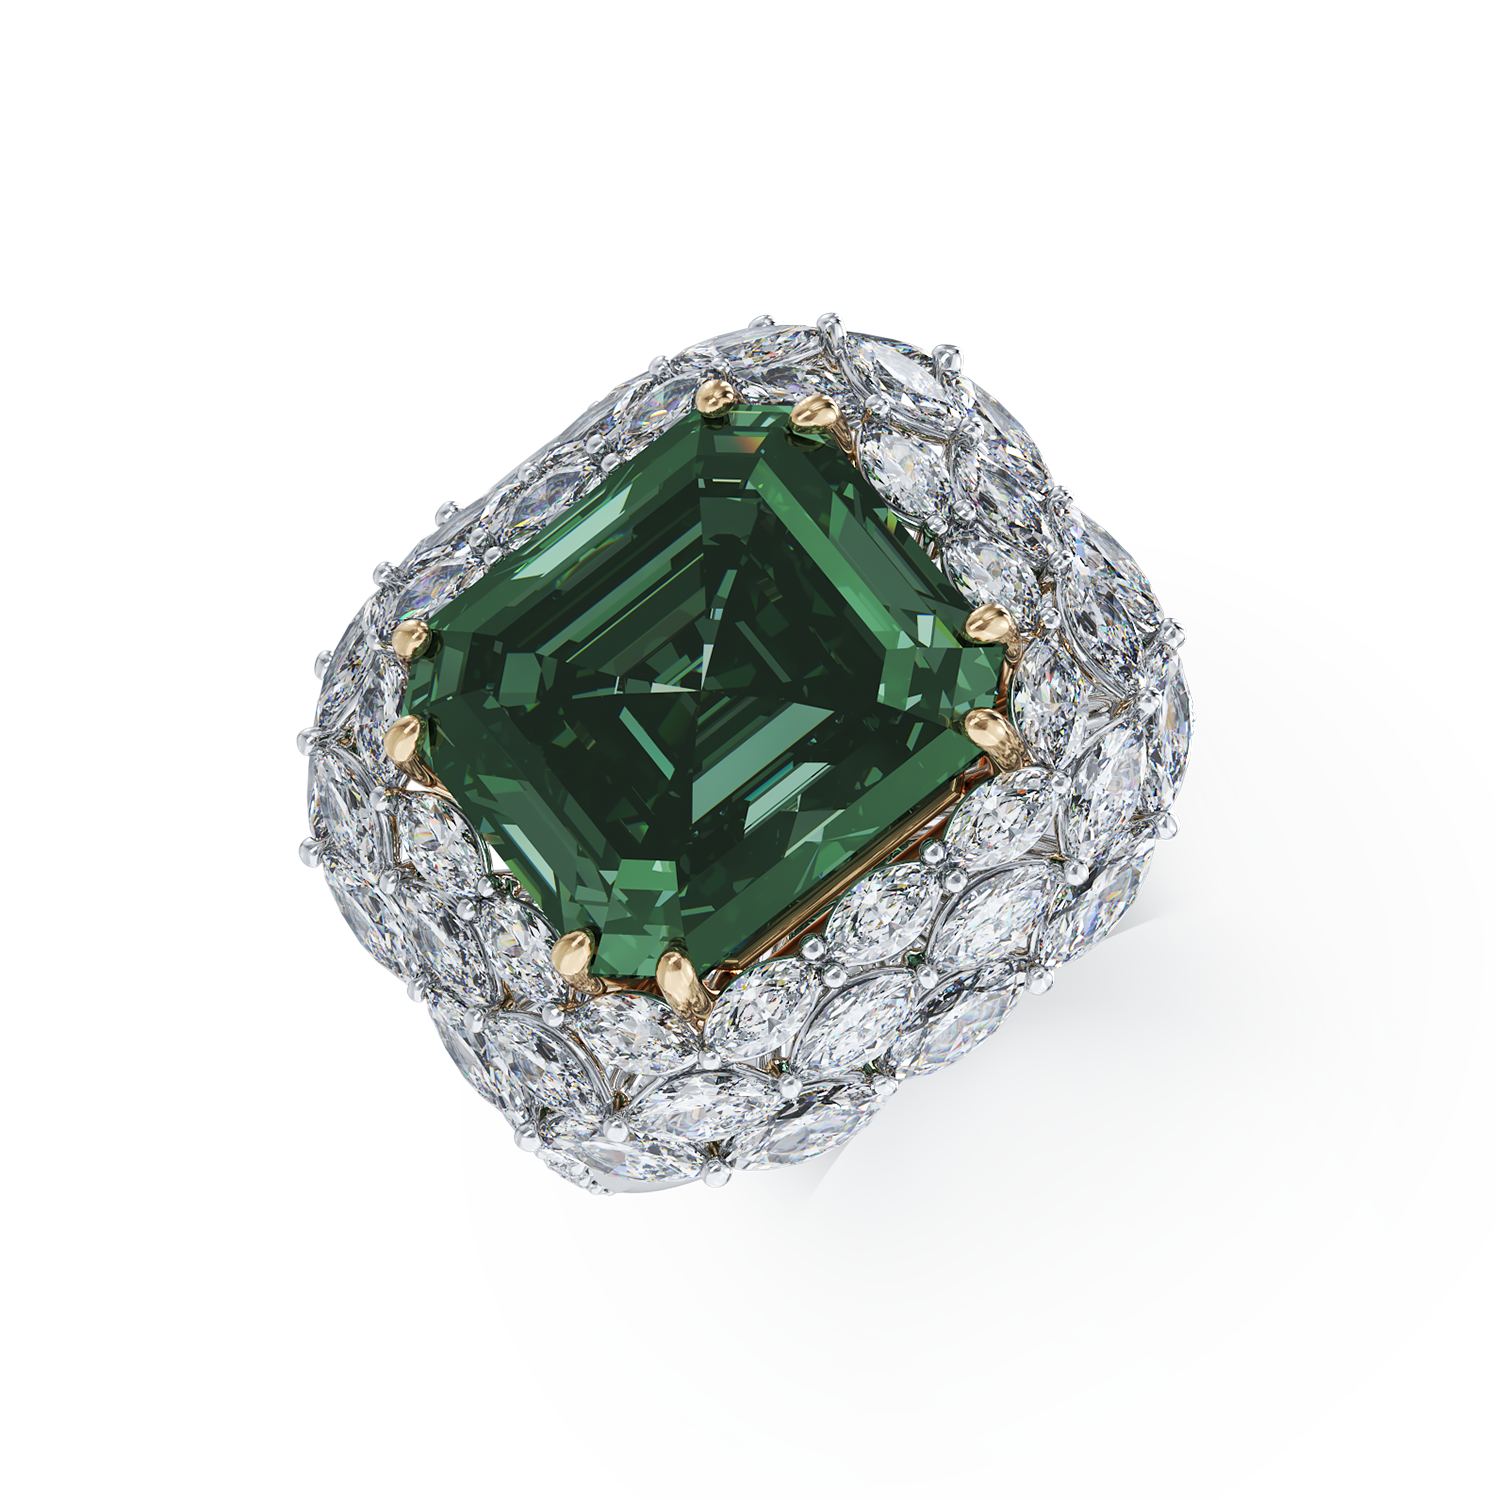 White gold ring with 10.91ct emerald and 3.14ct diamonds